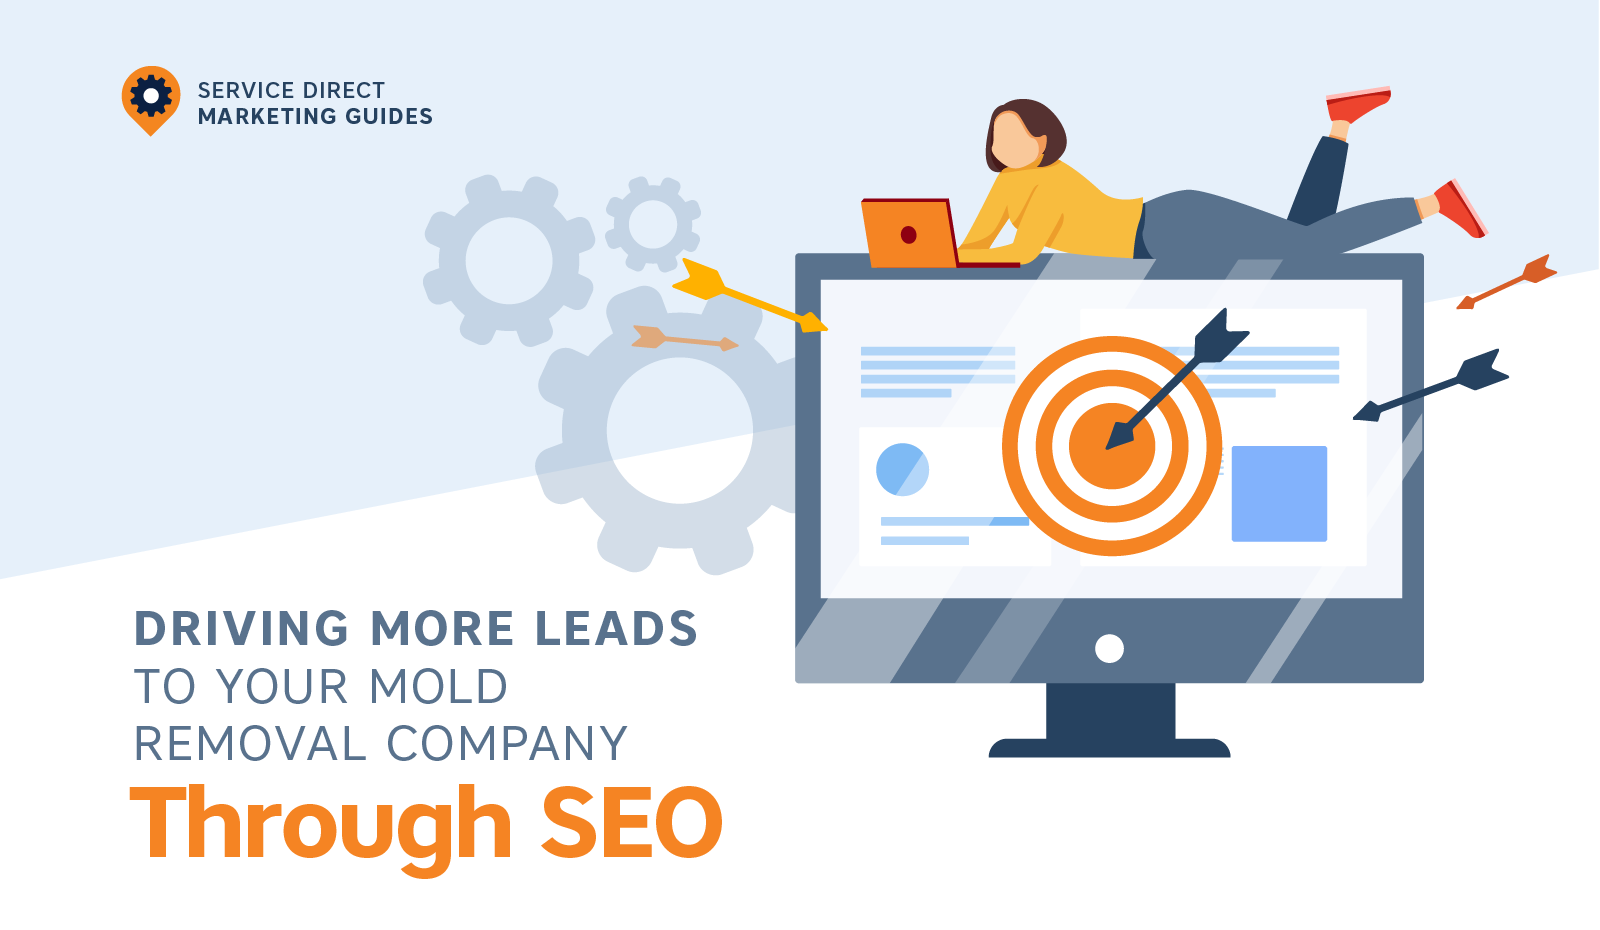 Driving More Leads to Your Mold Removal Company through SEO